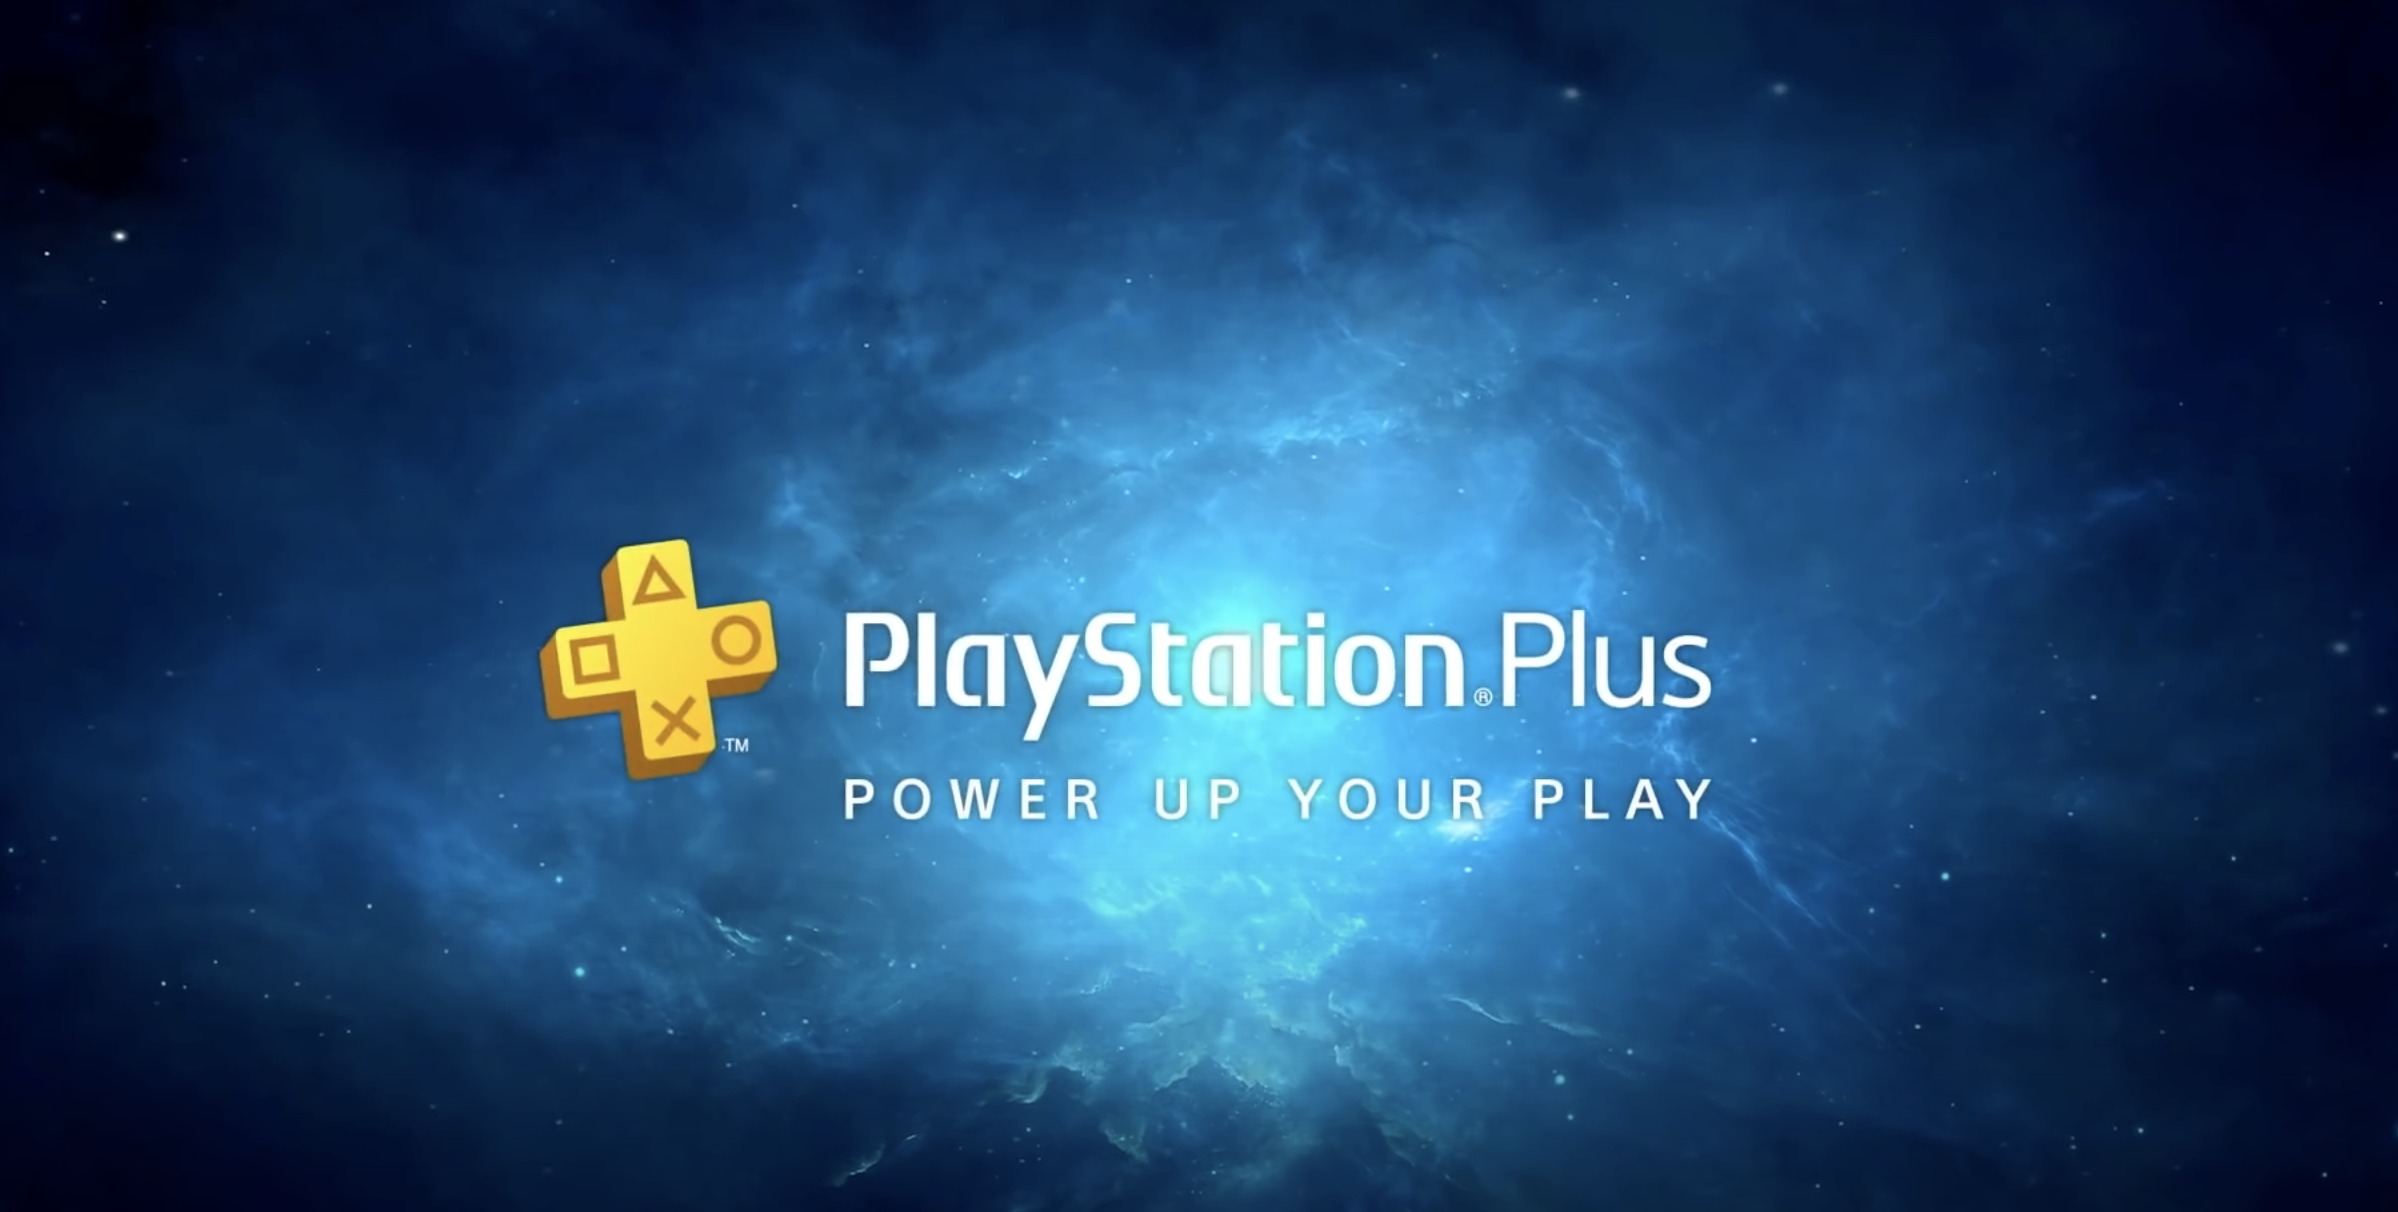 Sony PLAYSTATION Plus. PS Plus Deluxe. PLAYSTATION Plus Turkey. PLAYSTATION Plus Deluxe Turkey. Playstation turkey ps plus